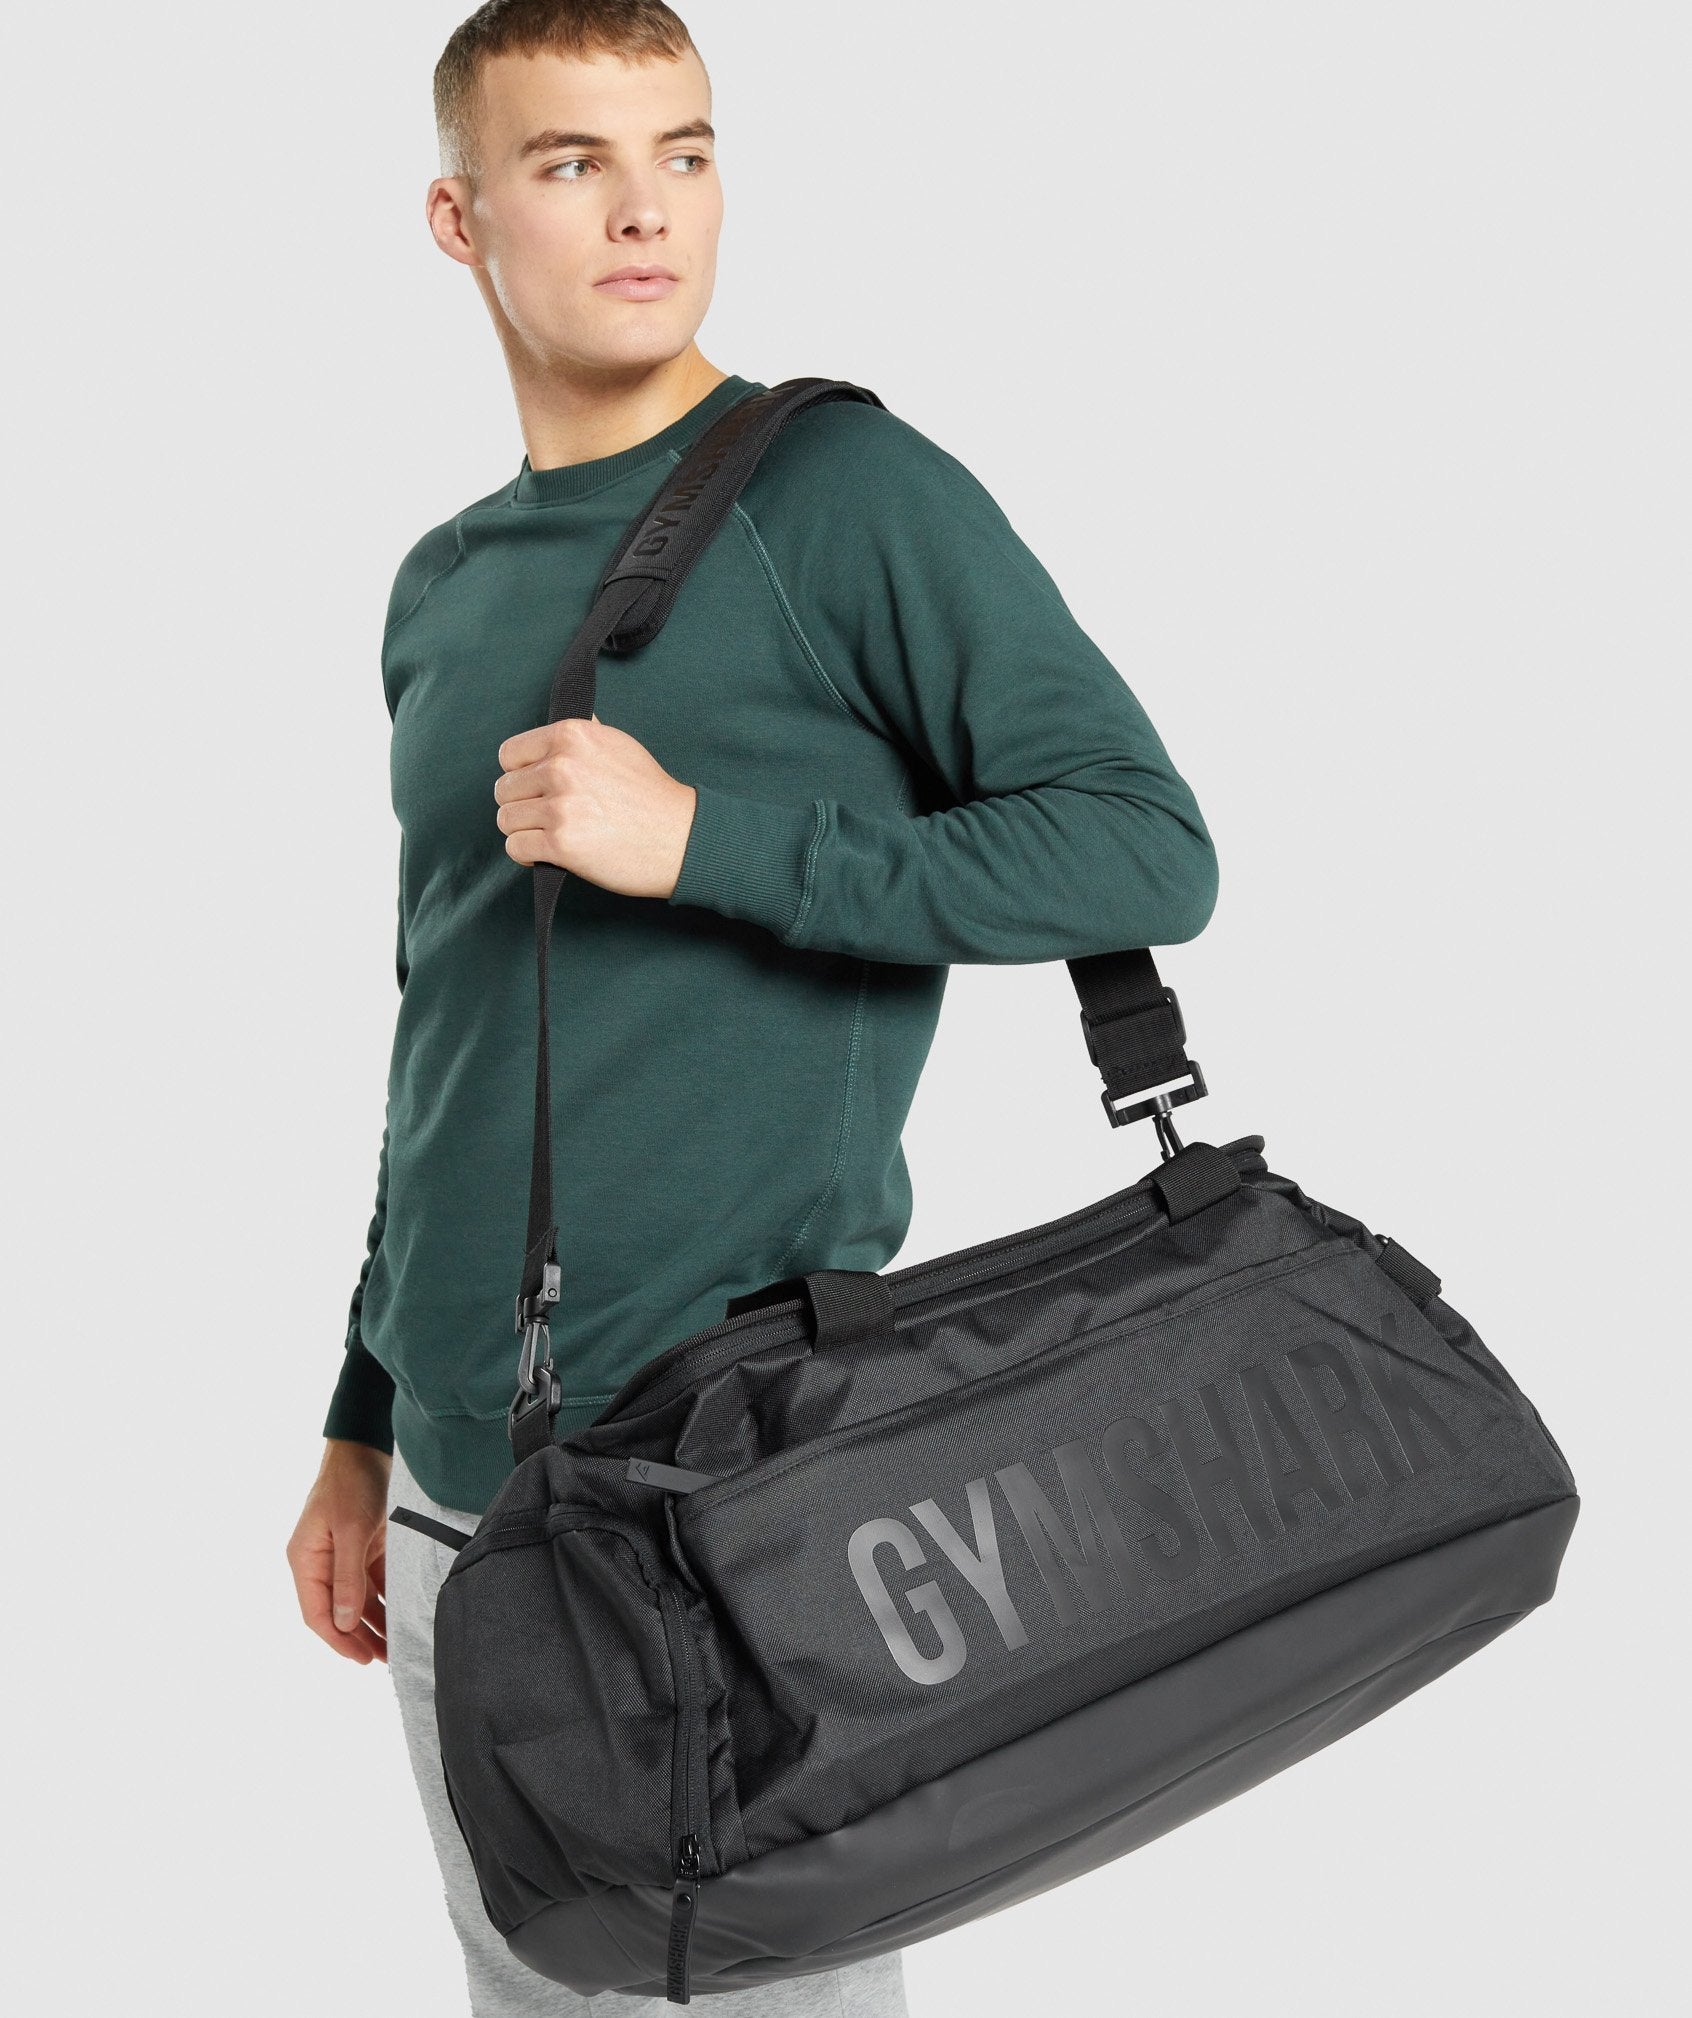 LC Holdall in Black - view 1